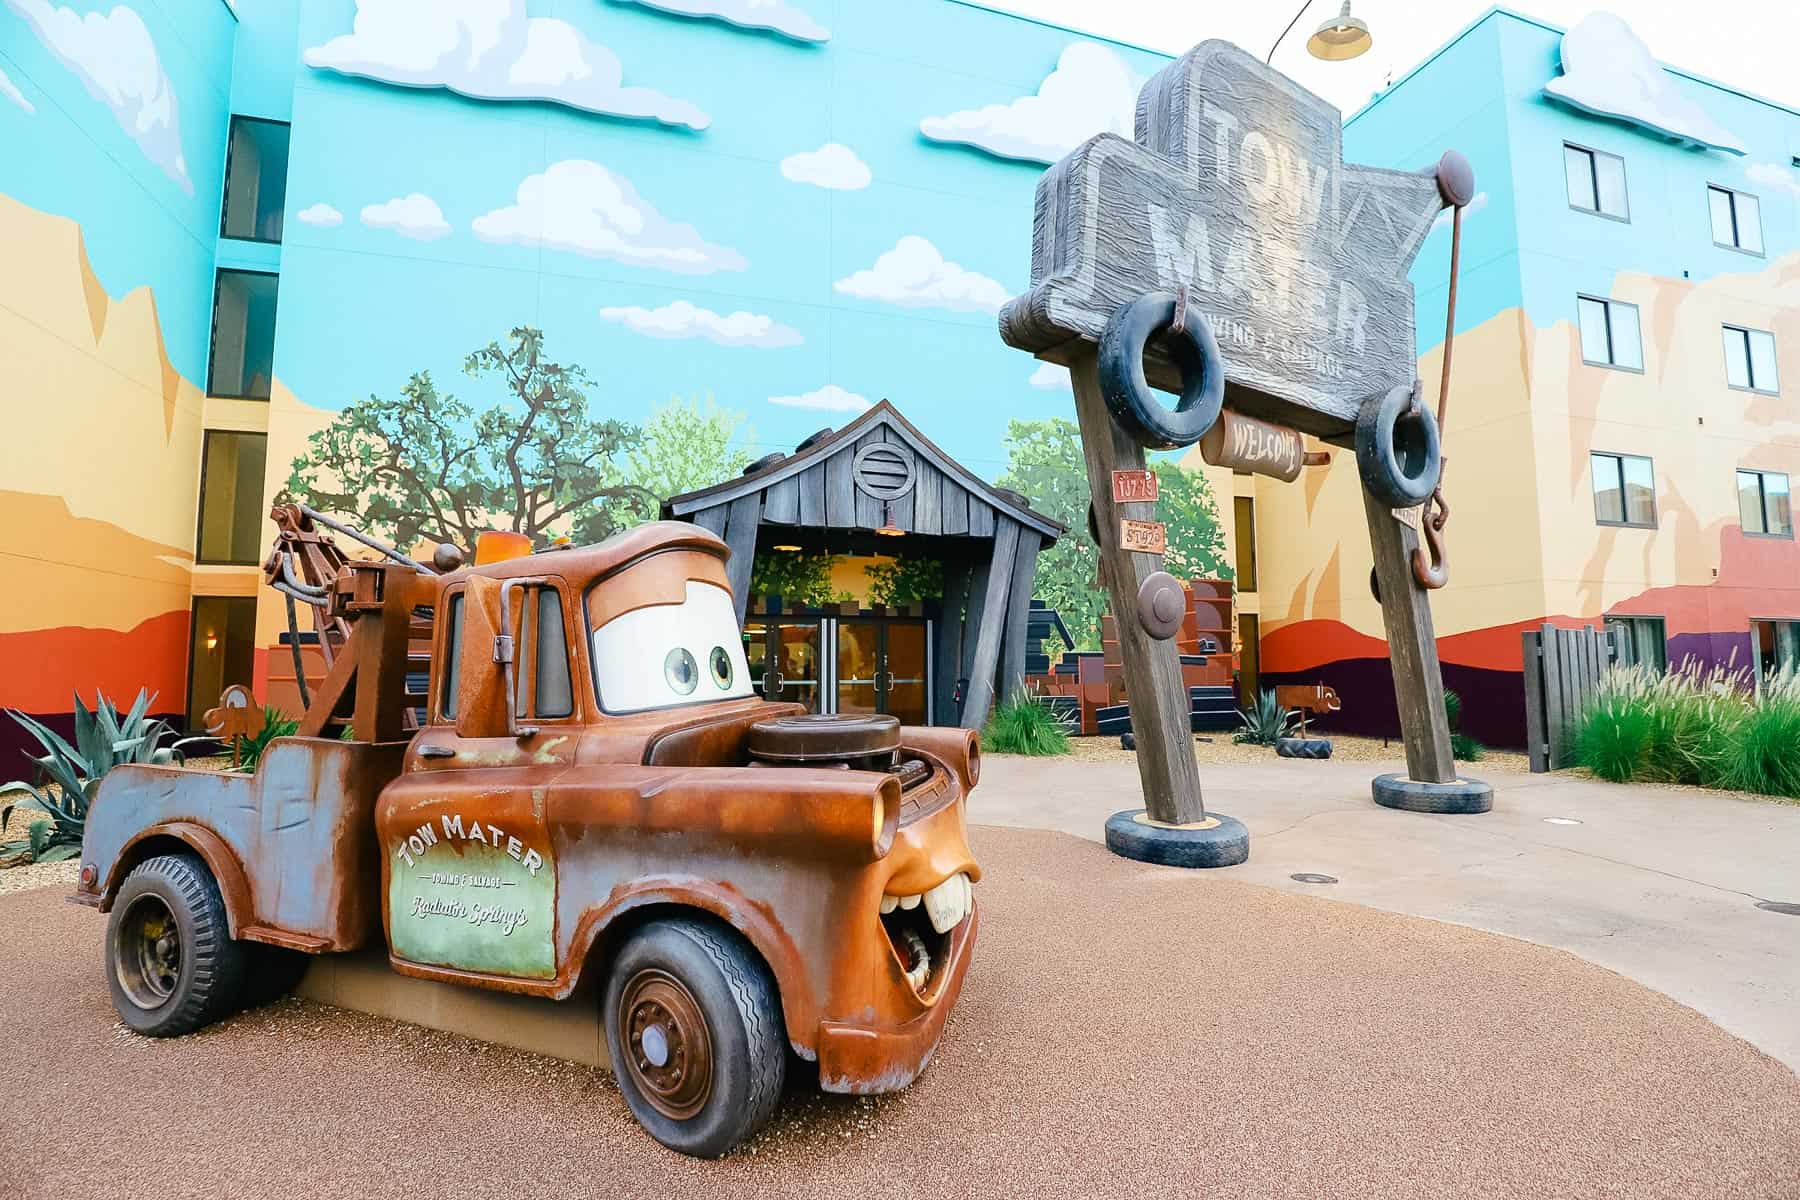 Mater at the Tow mater building 